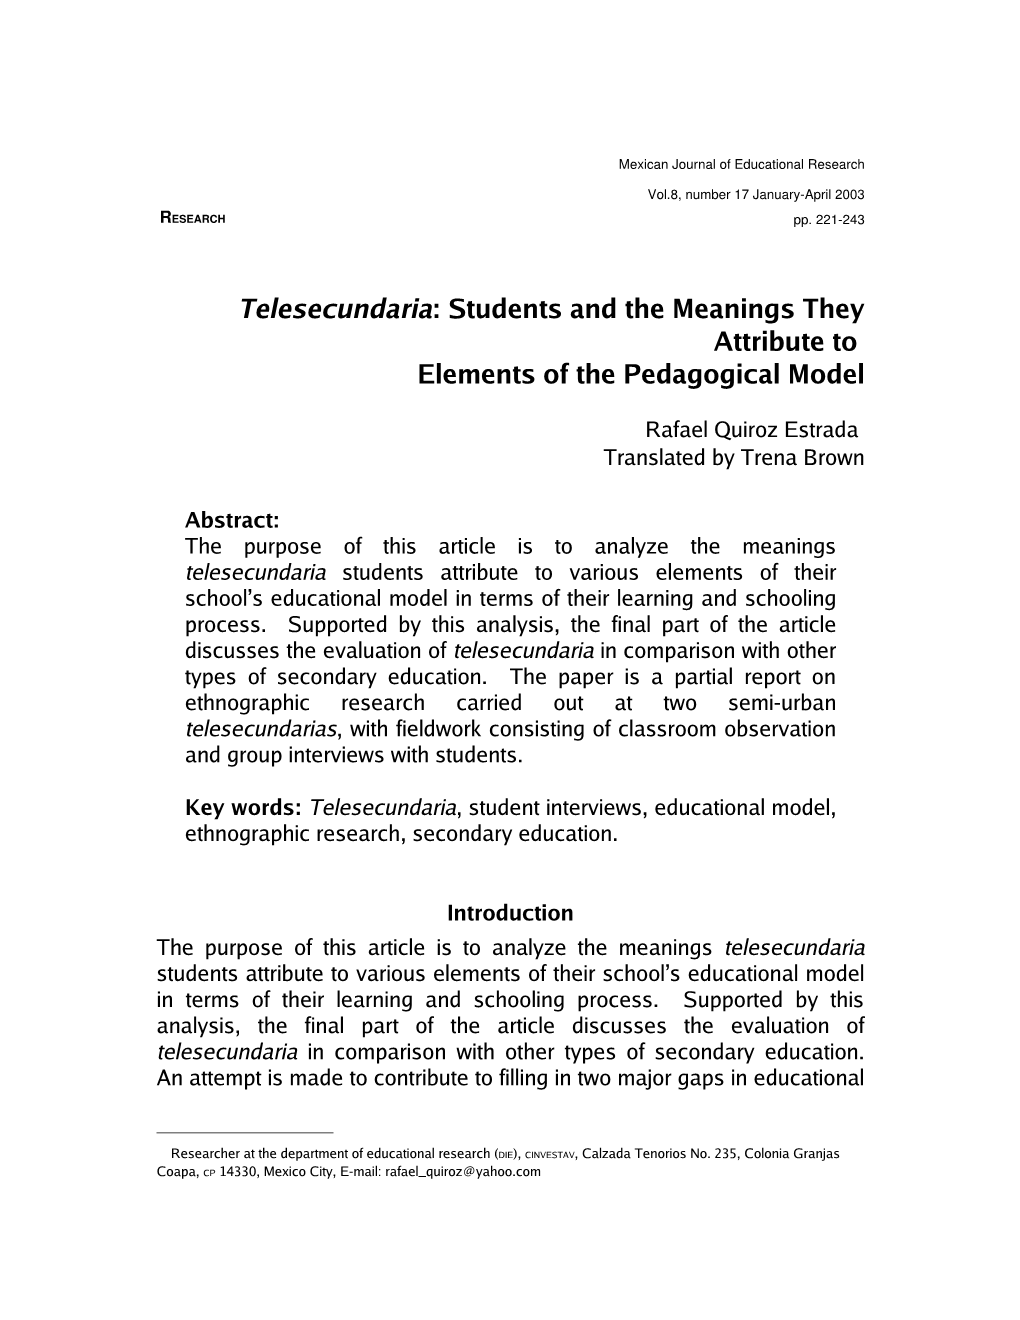 Telesecundaria: Students and the Meanings They Attribute to Elements of the Pedagogical Model